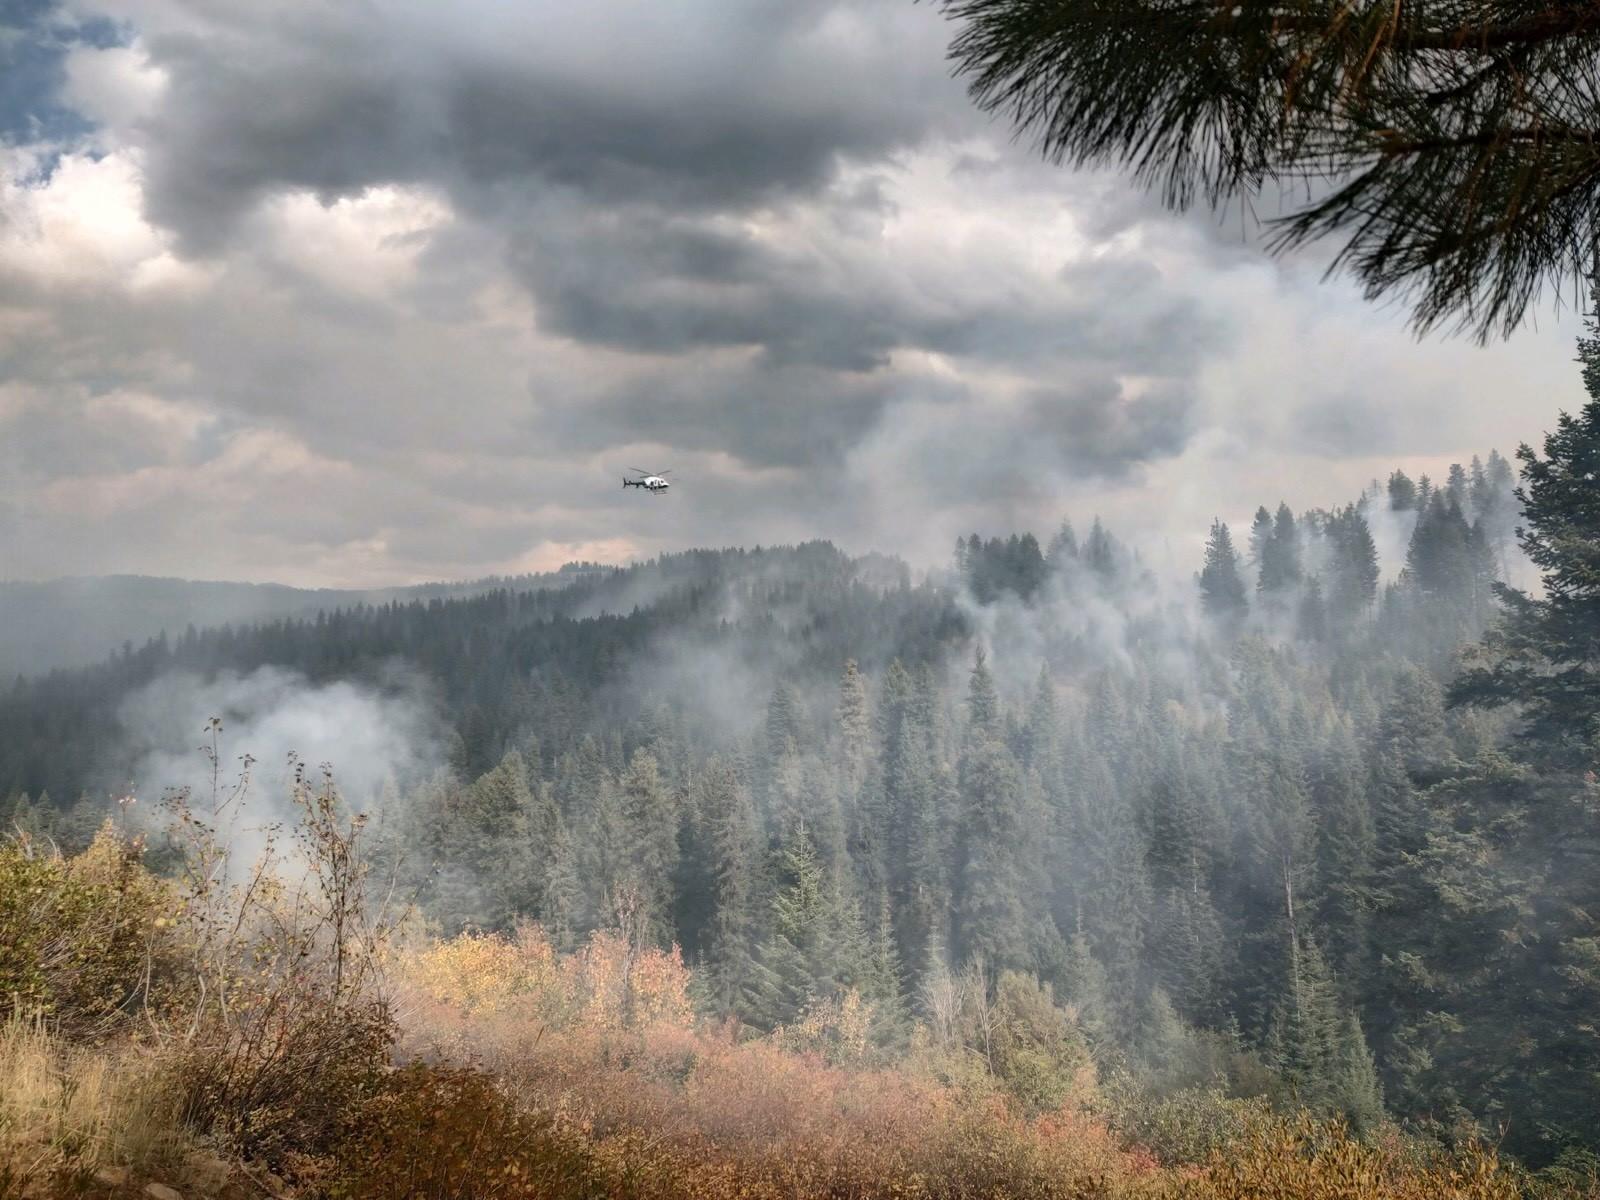 Helicopter ignitions play a major role in successful prescribed burning